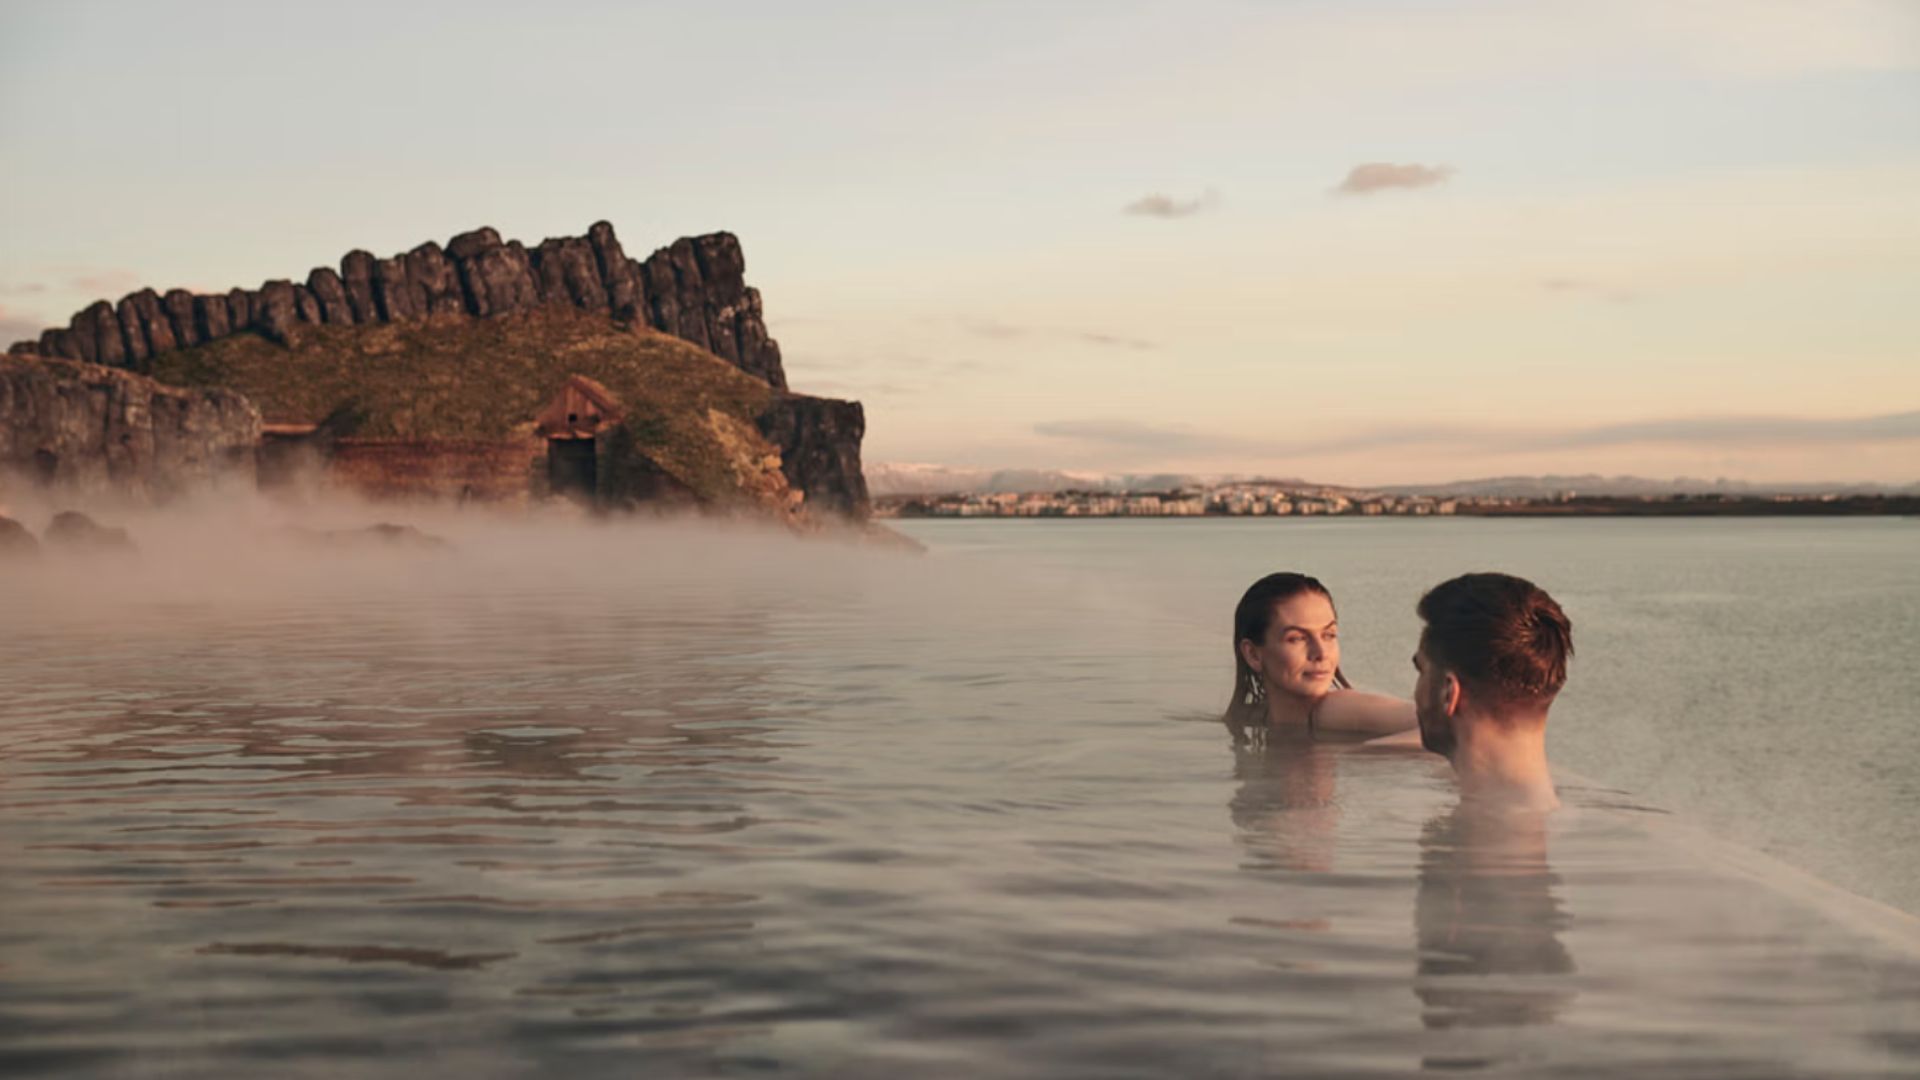 The Sky Lagoon is a new geothermal spa in Iceland